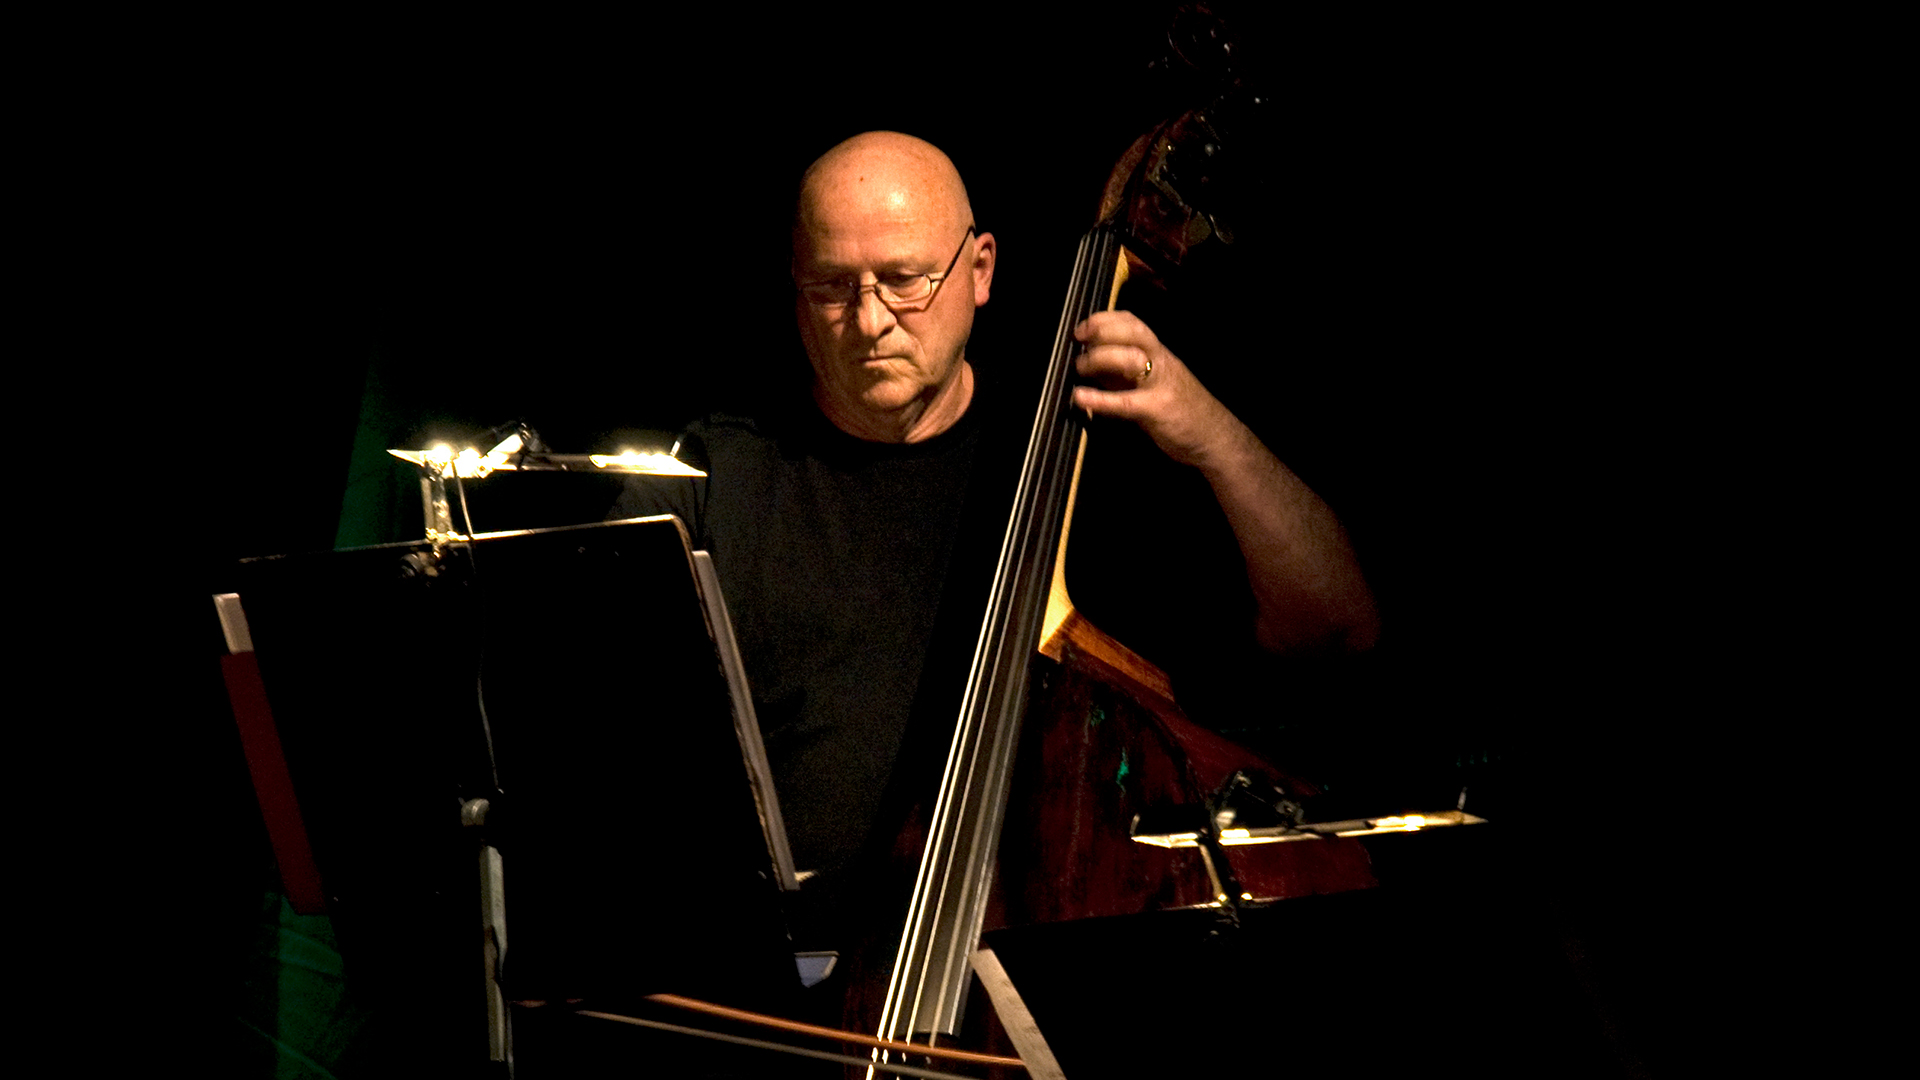 A man playing a double bass